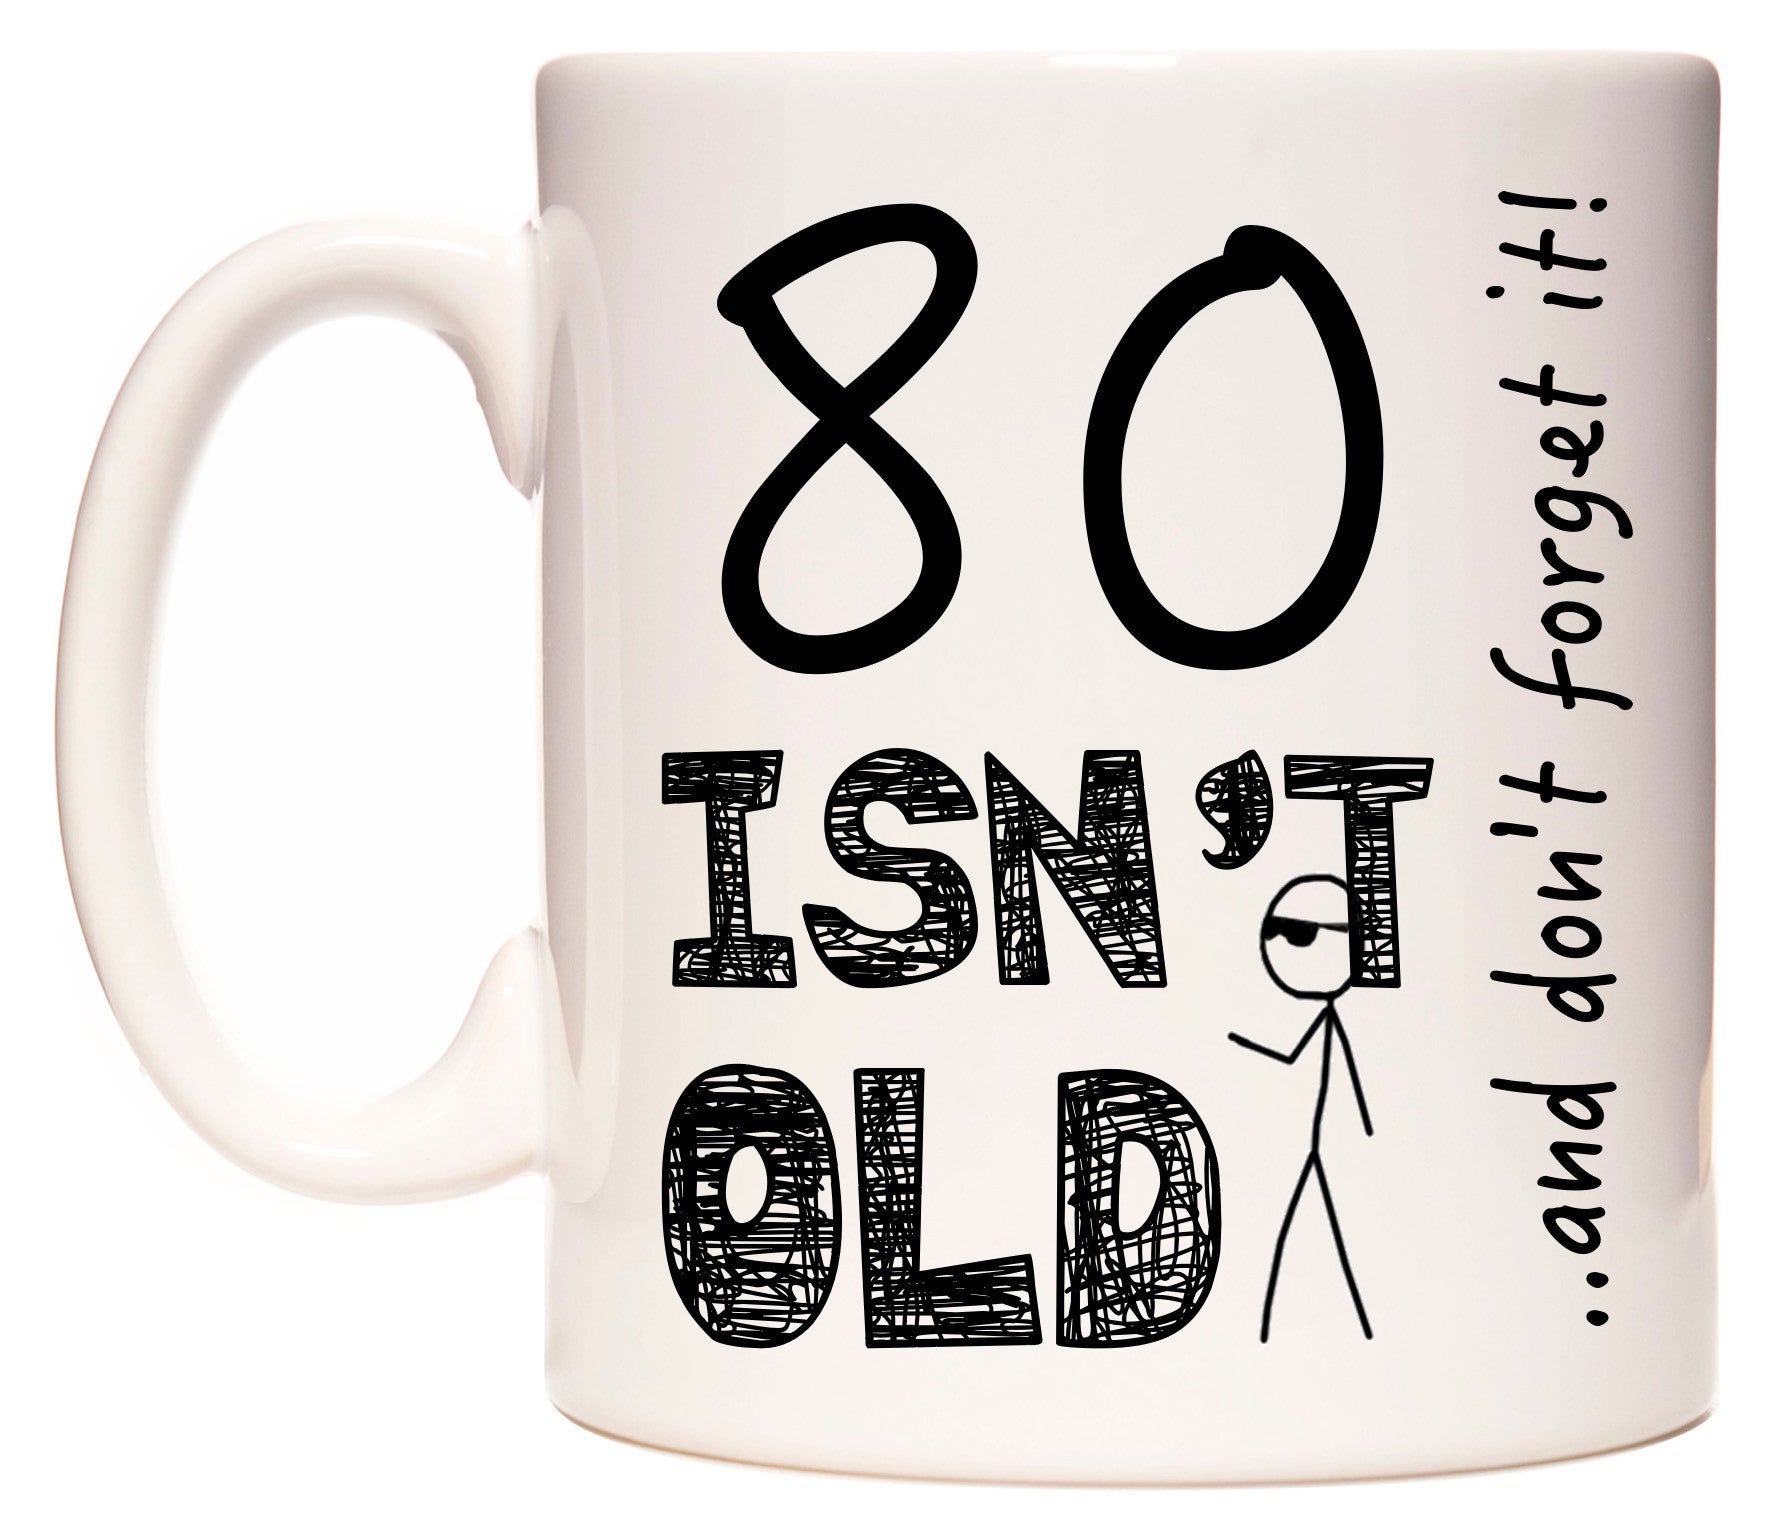 This mug features 80 Isn't Old